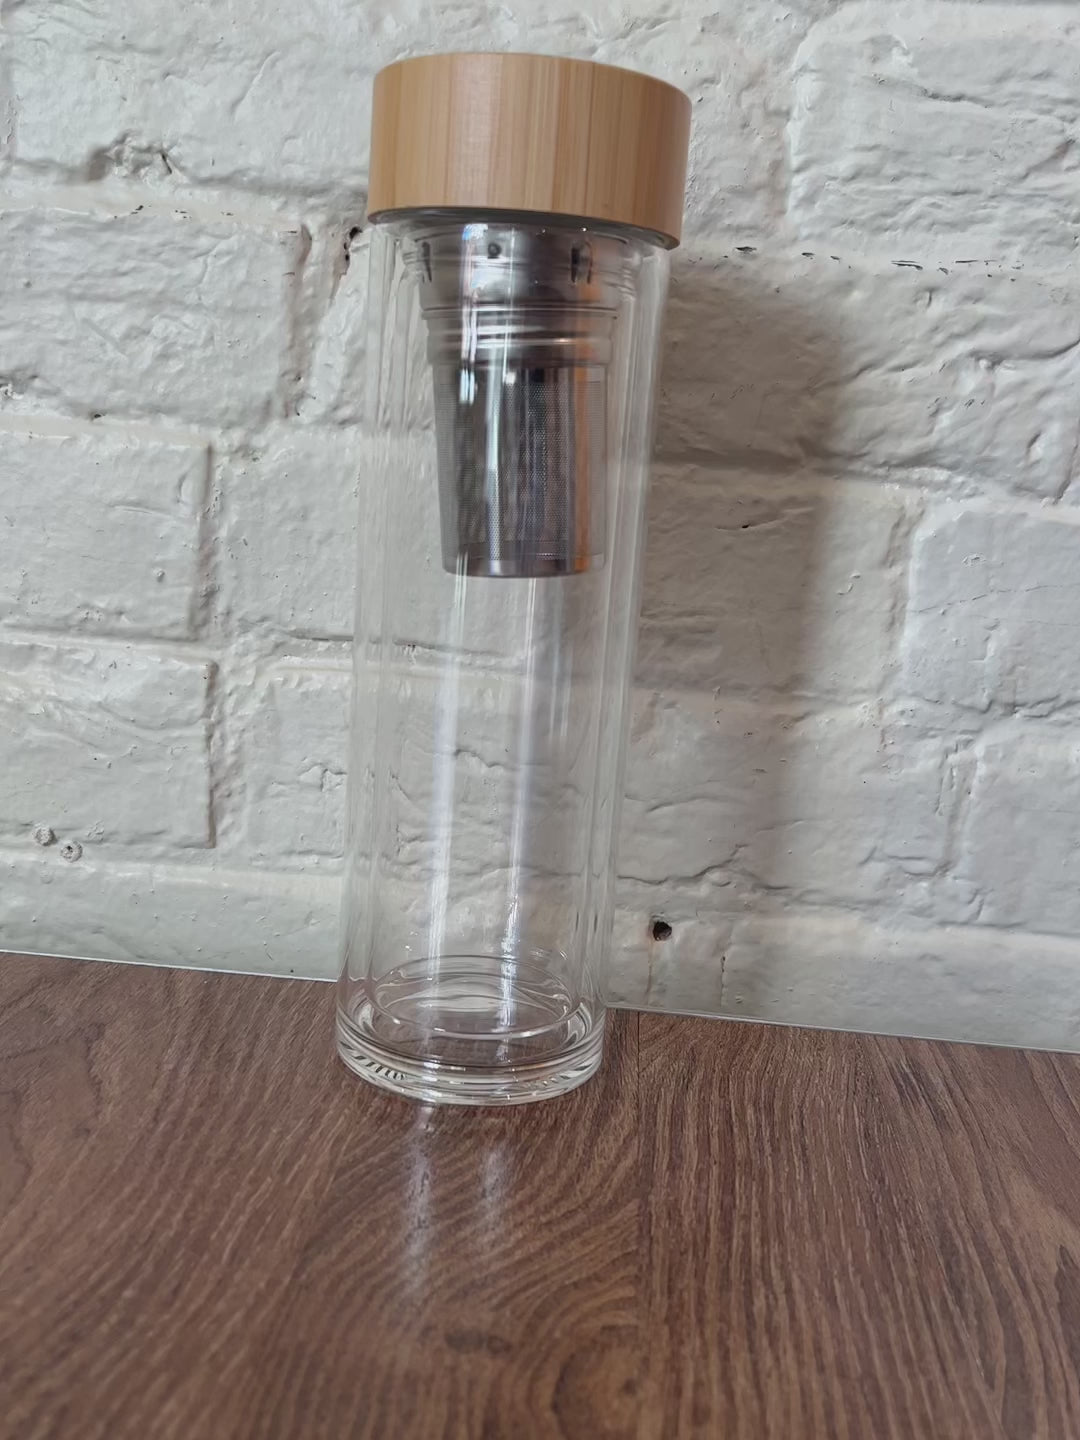 Brew in glass infuser